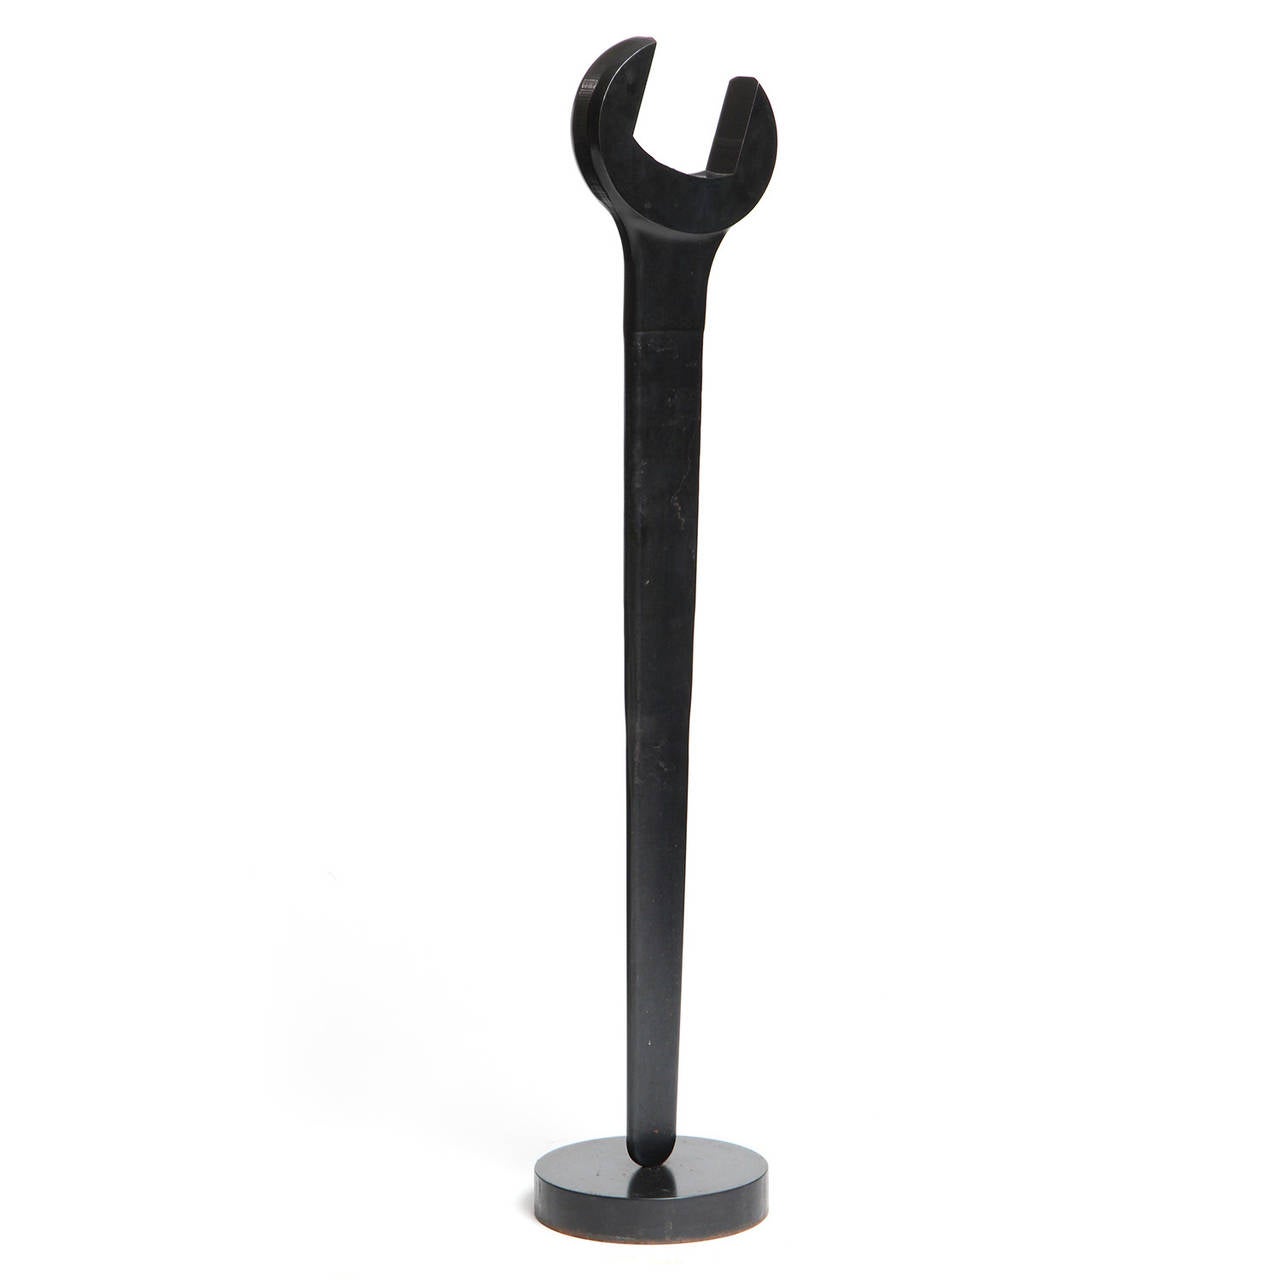 A dramatically oversized patinated forged steel wrench beautifully mounted on a circular base.